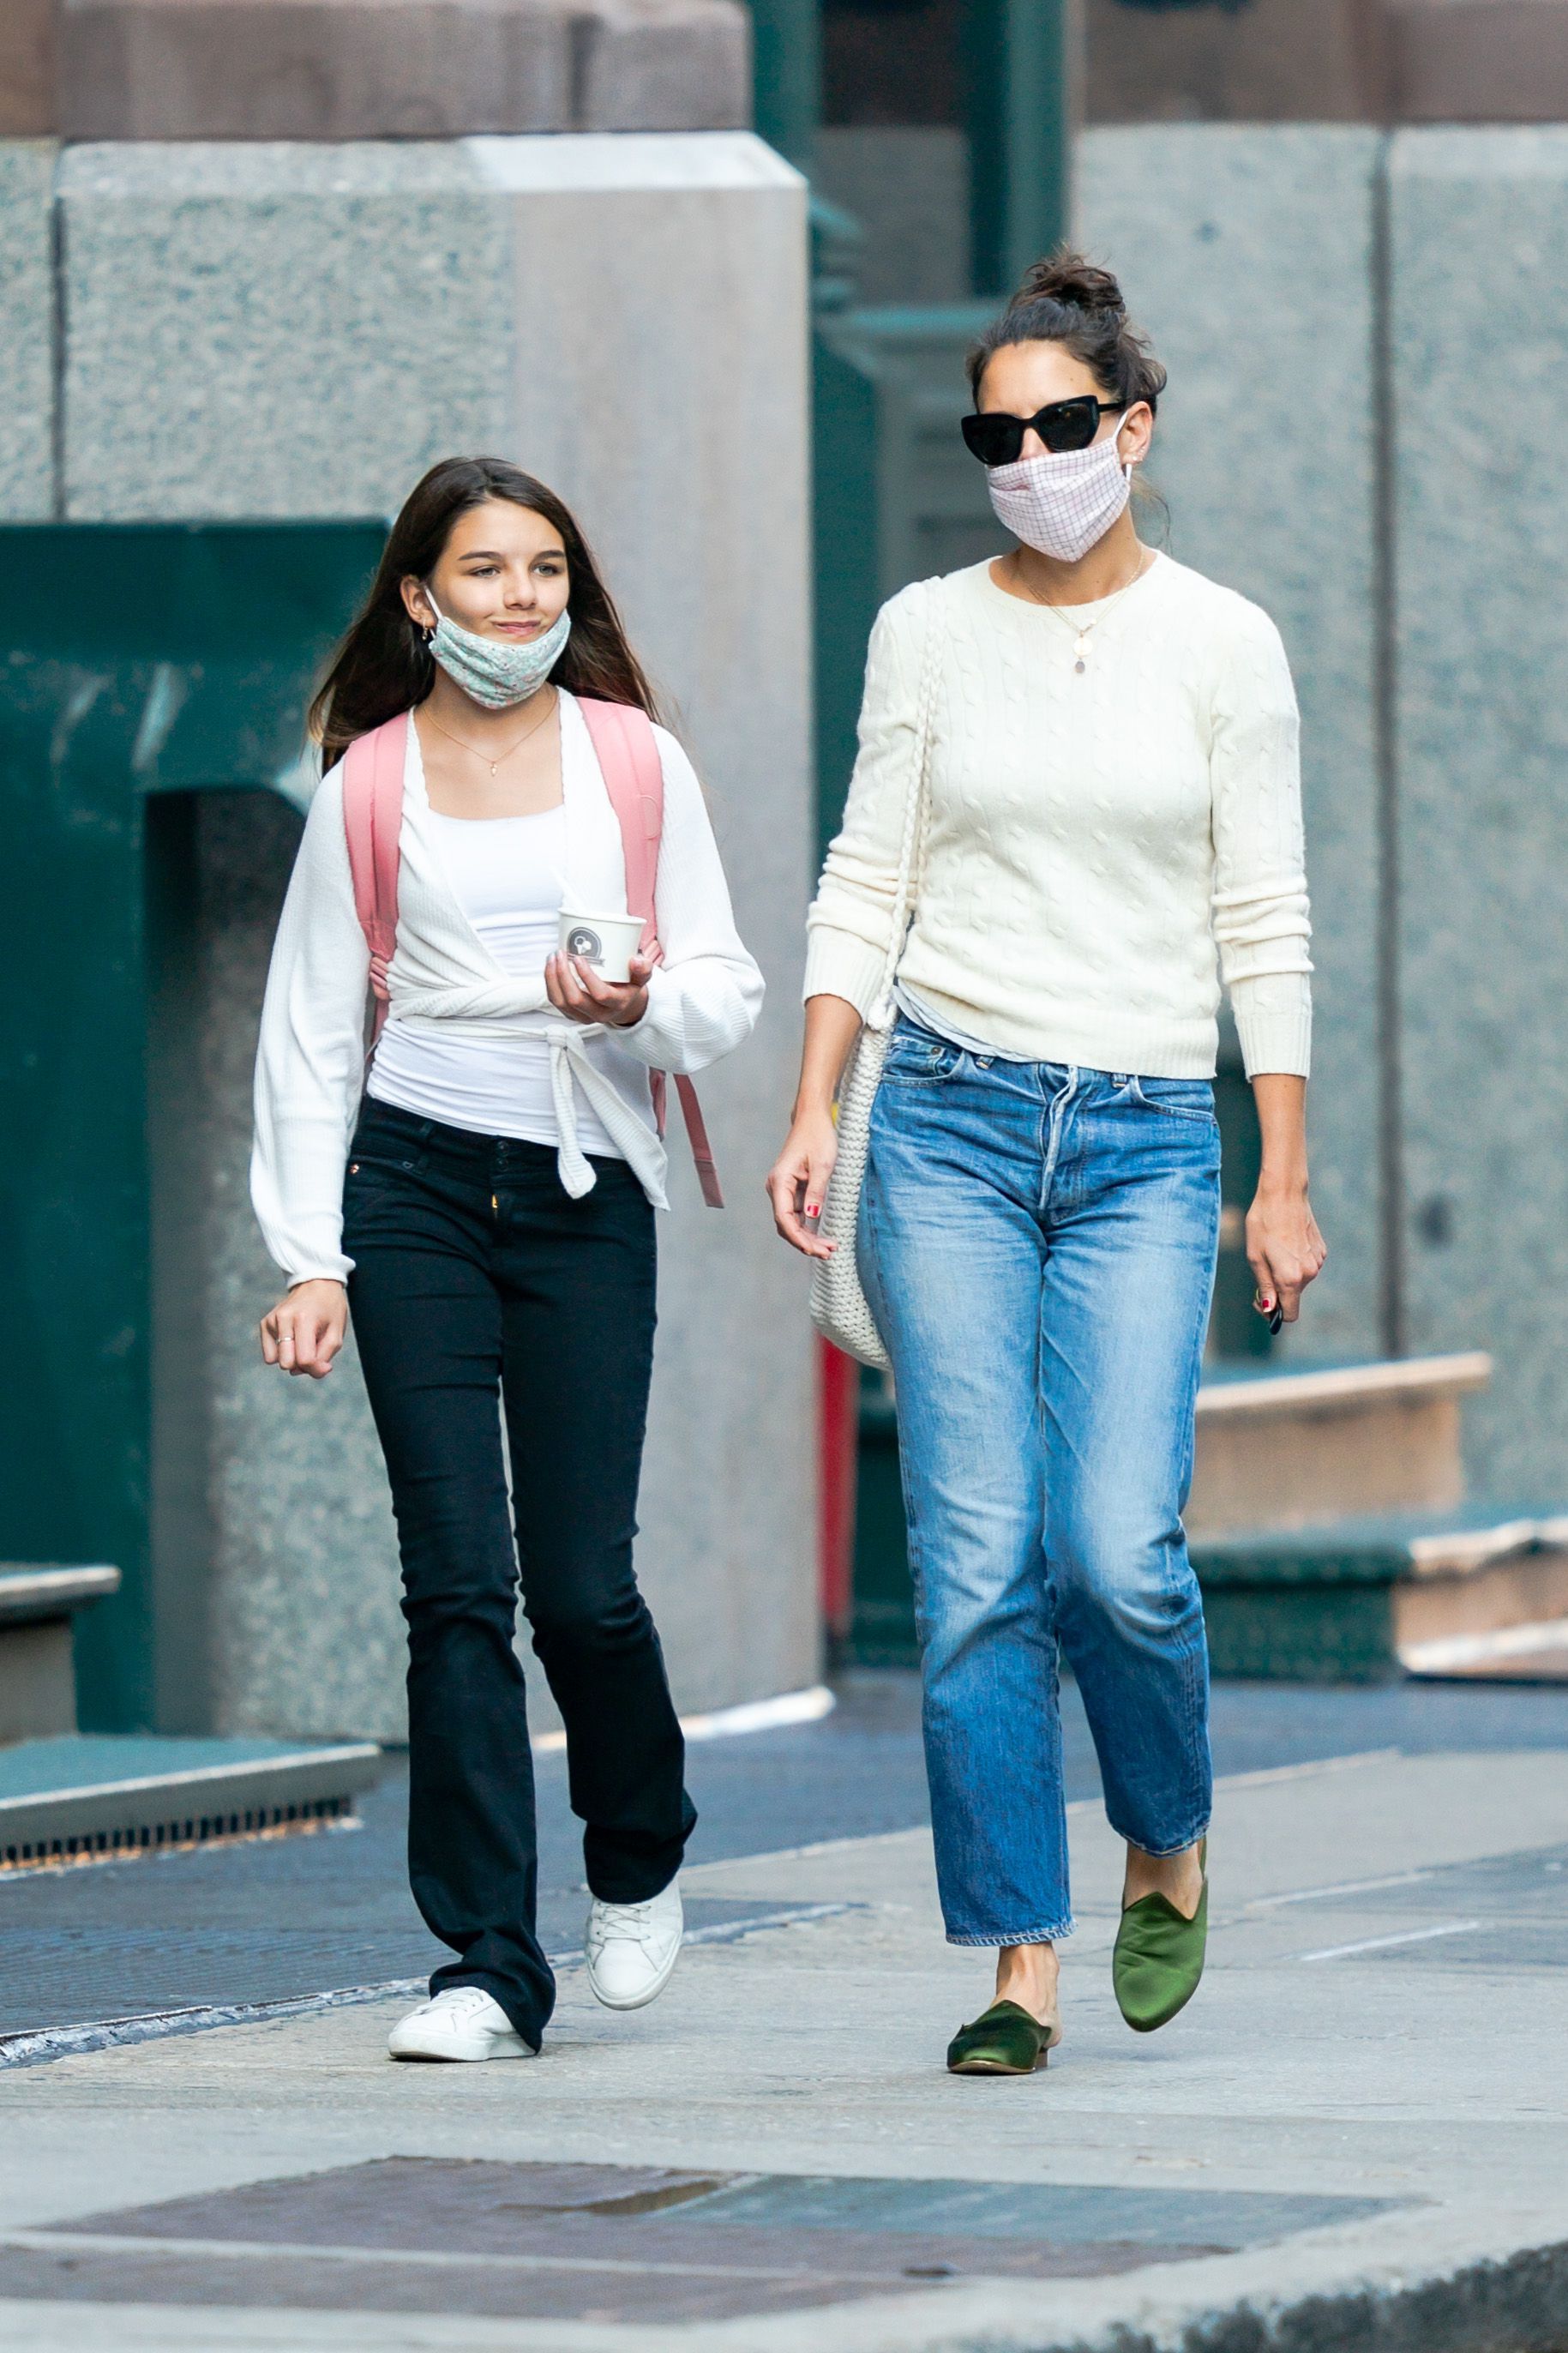 Actress Katie Holmes and her daughter Suri on September 8 2020 in New York City | Source: Getty Images